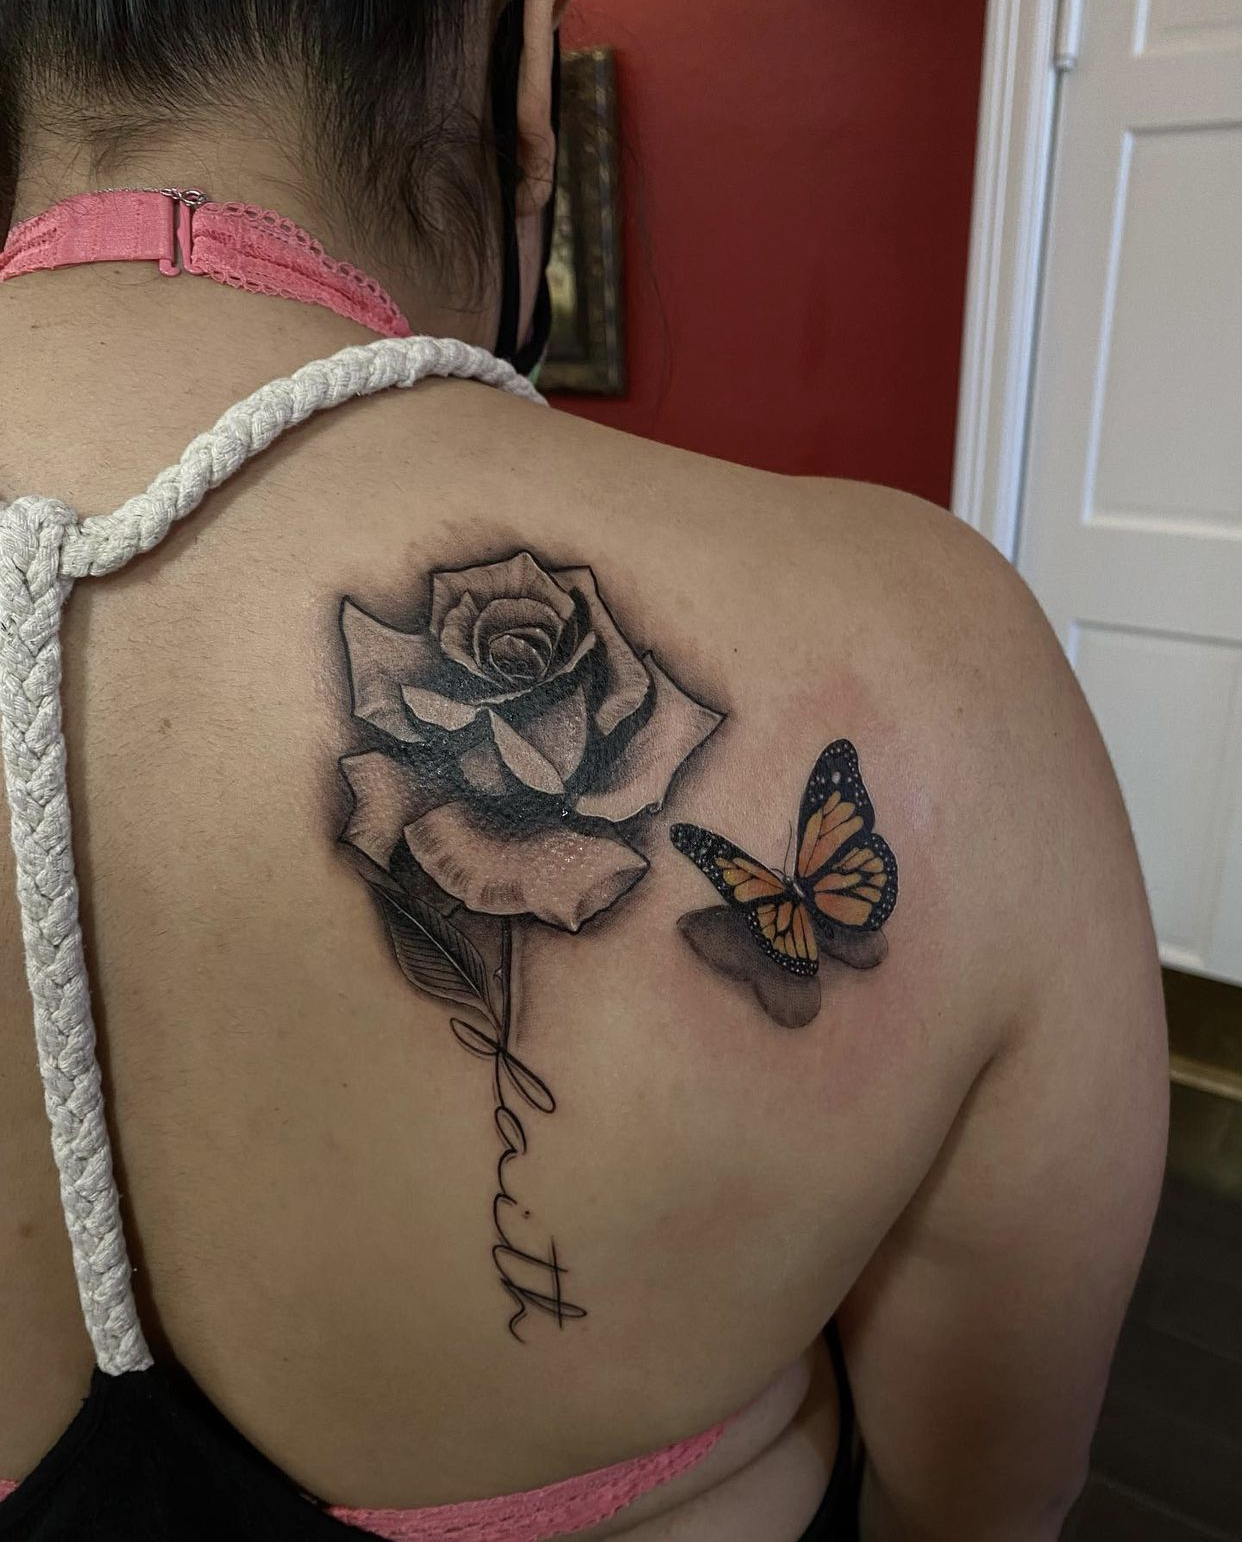 3D Rose And Butterfly Tattoo on Shoulder With Name